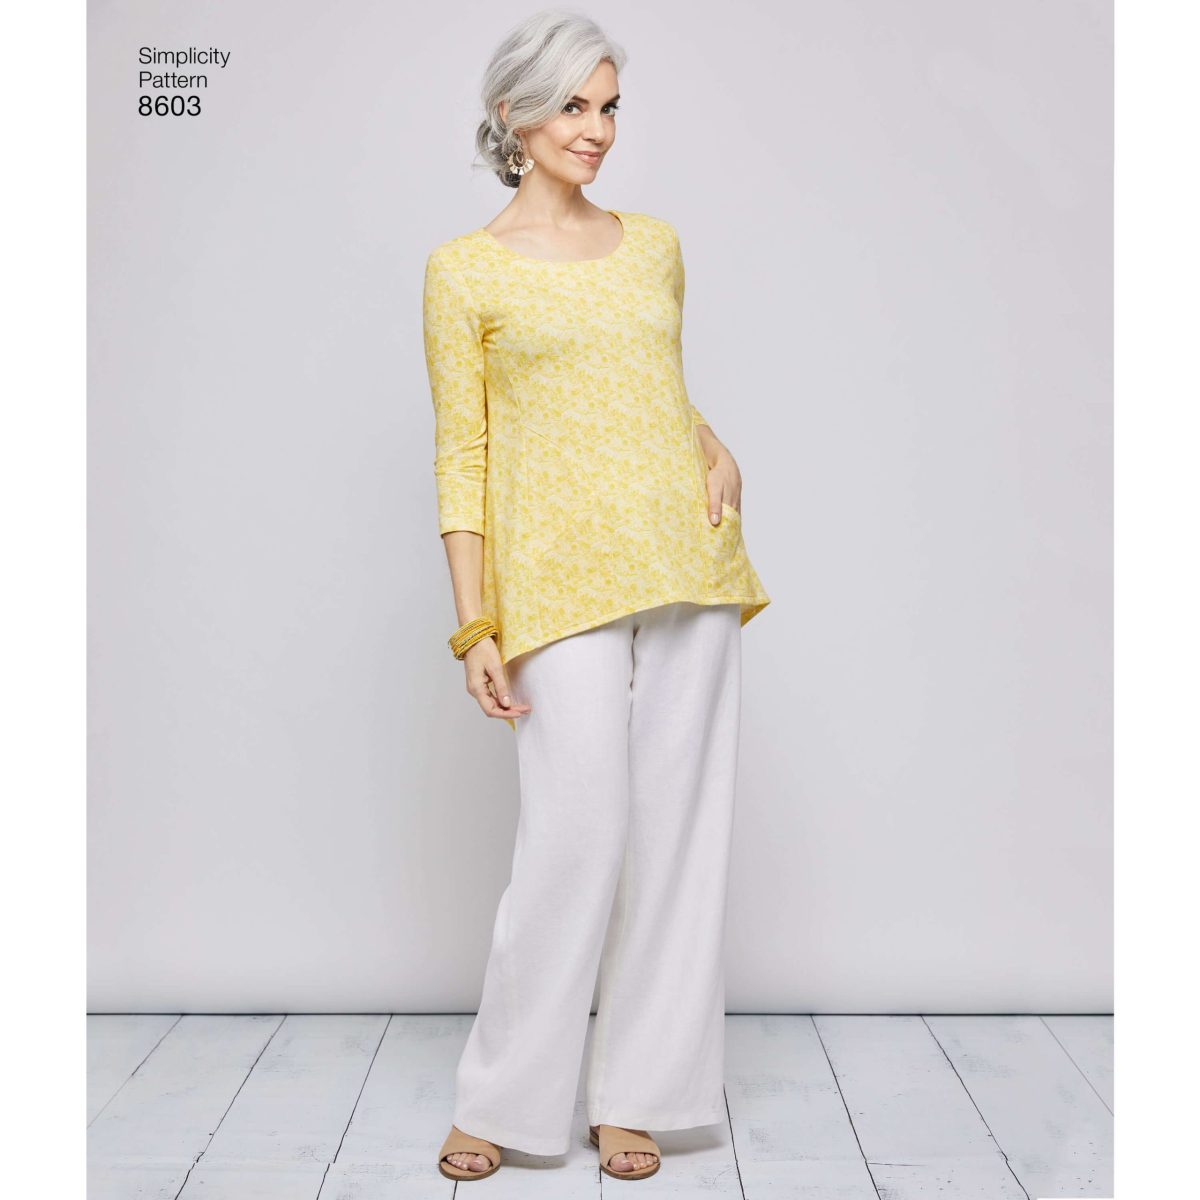 Simplicity Sewing Pattern 8603 Misses' Pullover Tops by Elaine Heigl